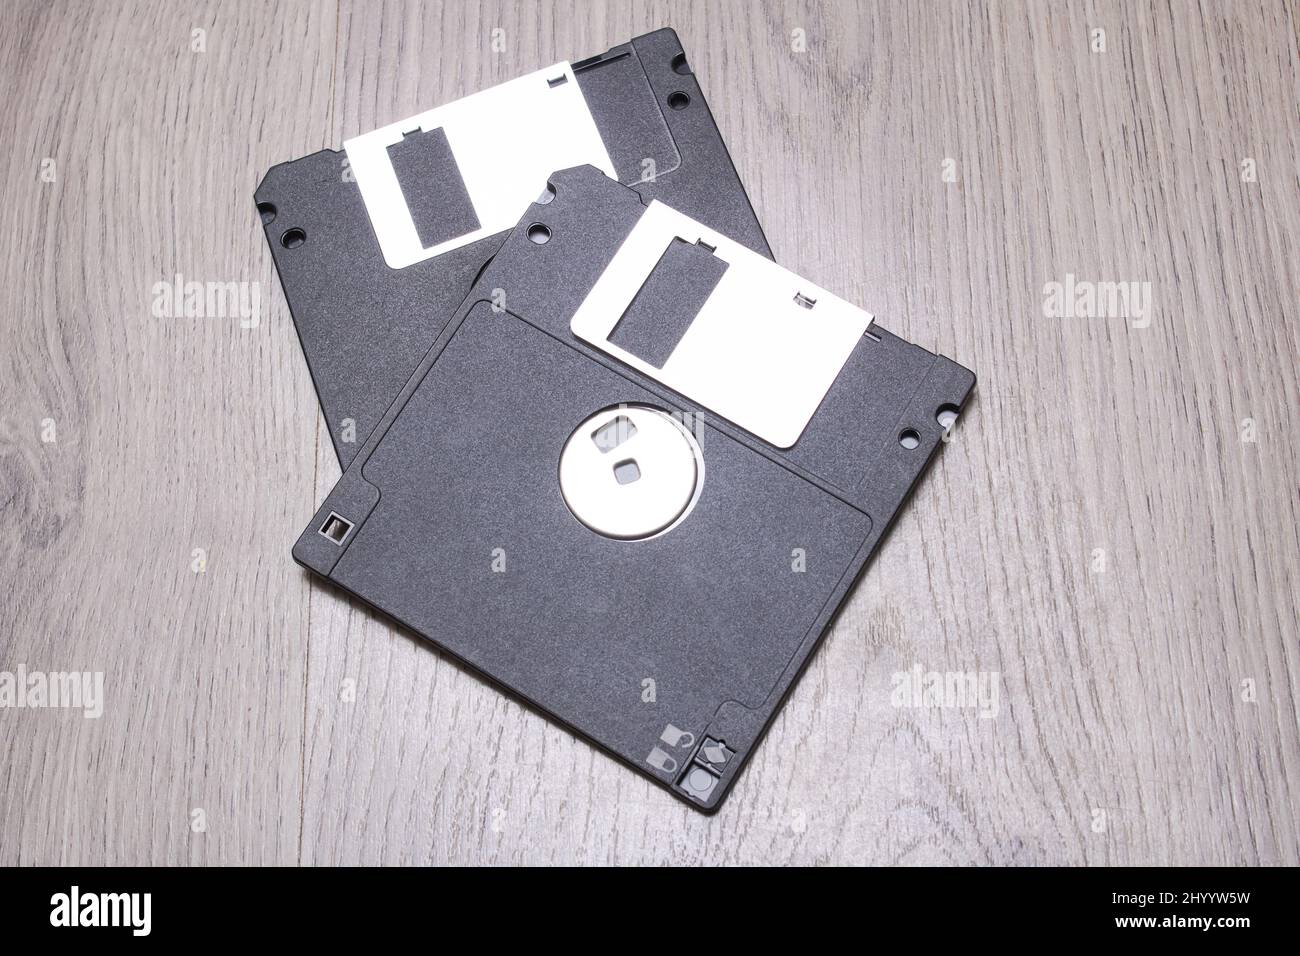 Two floppy disks on a wooden table close up Stock Photo